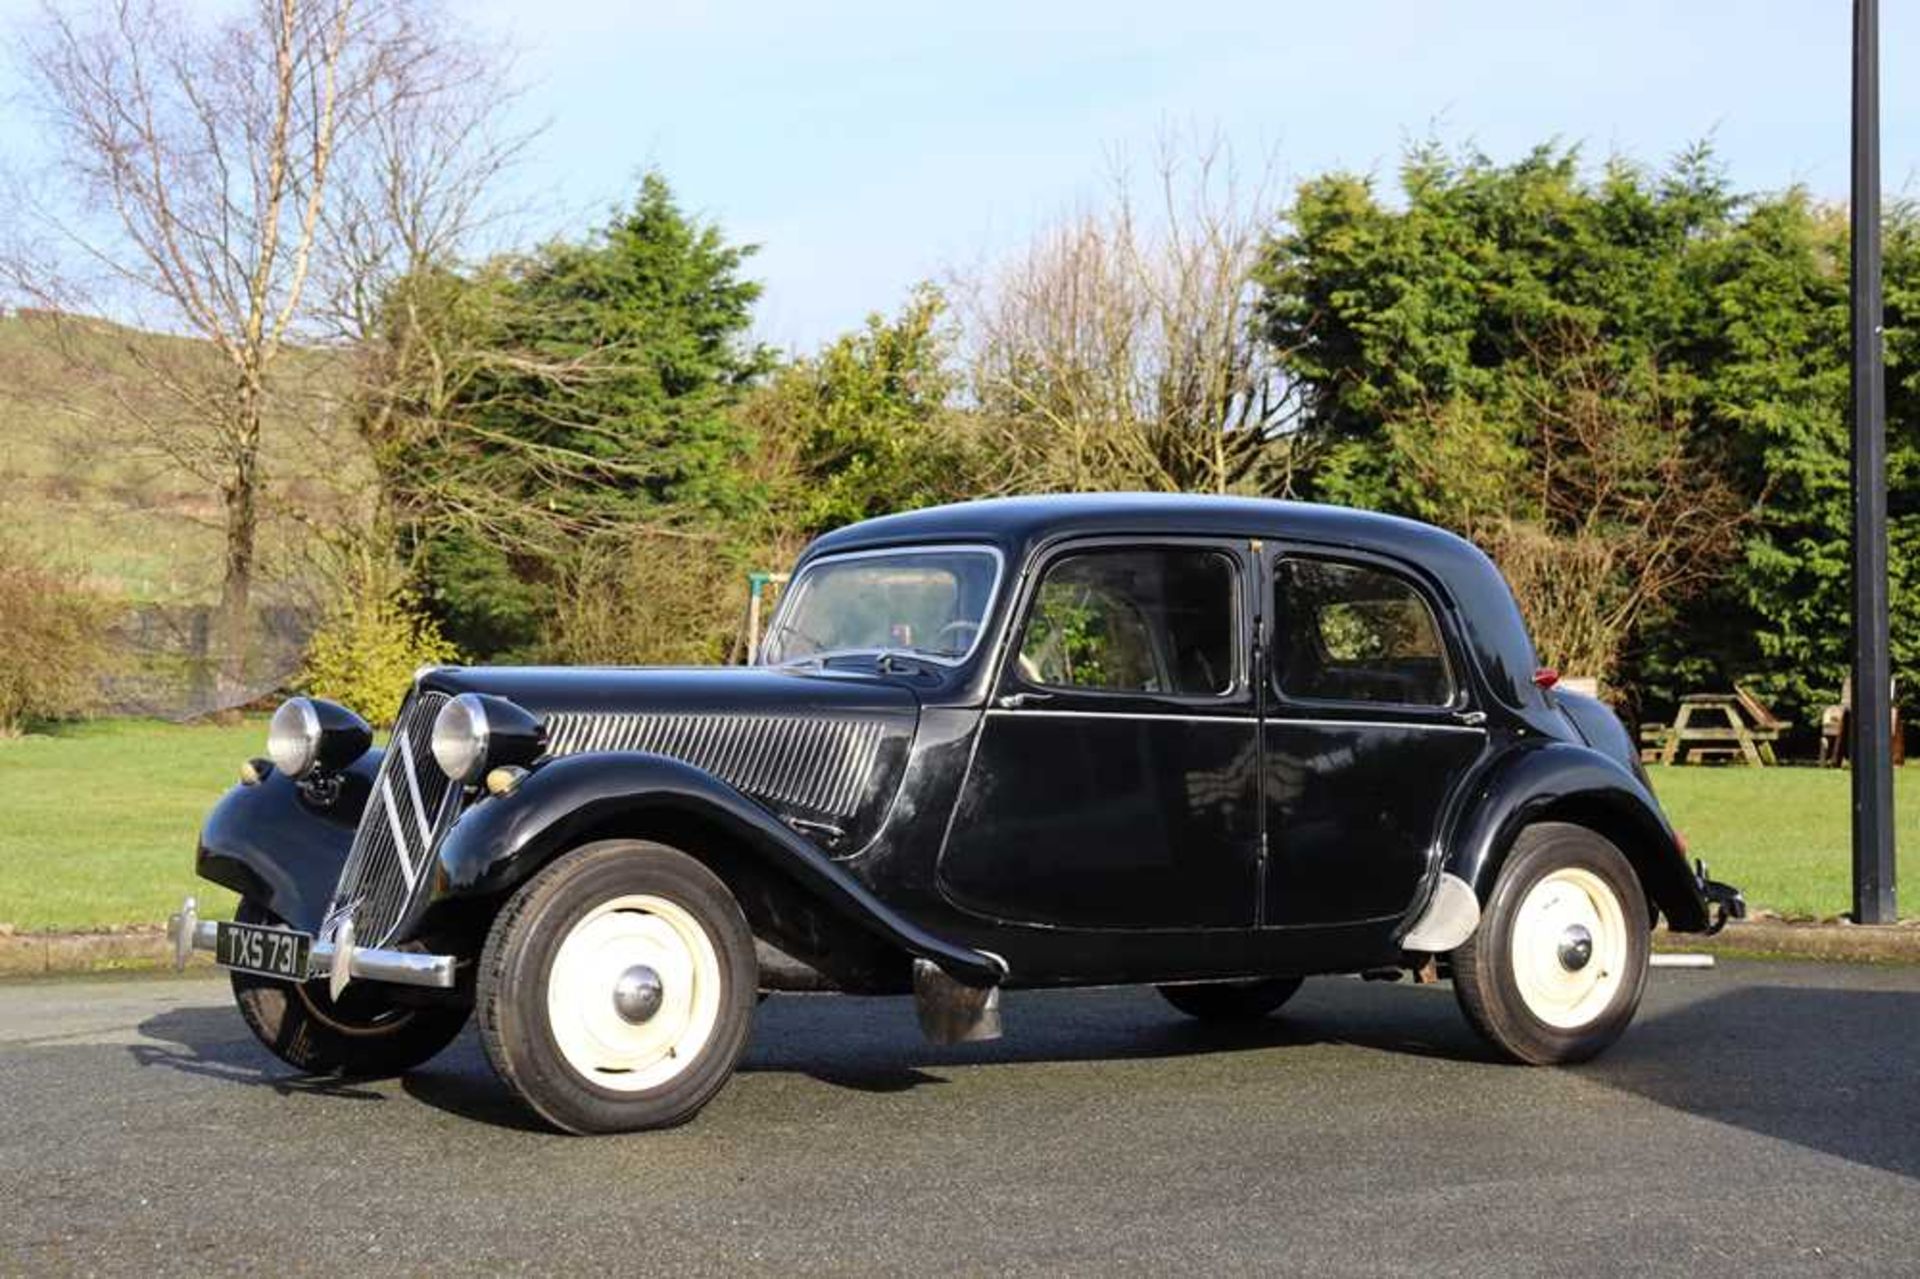 1952 Citroën 11BL Traction Avant In current ownership for over 40 years - Image 2 of 60